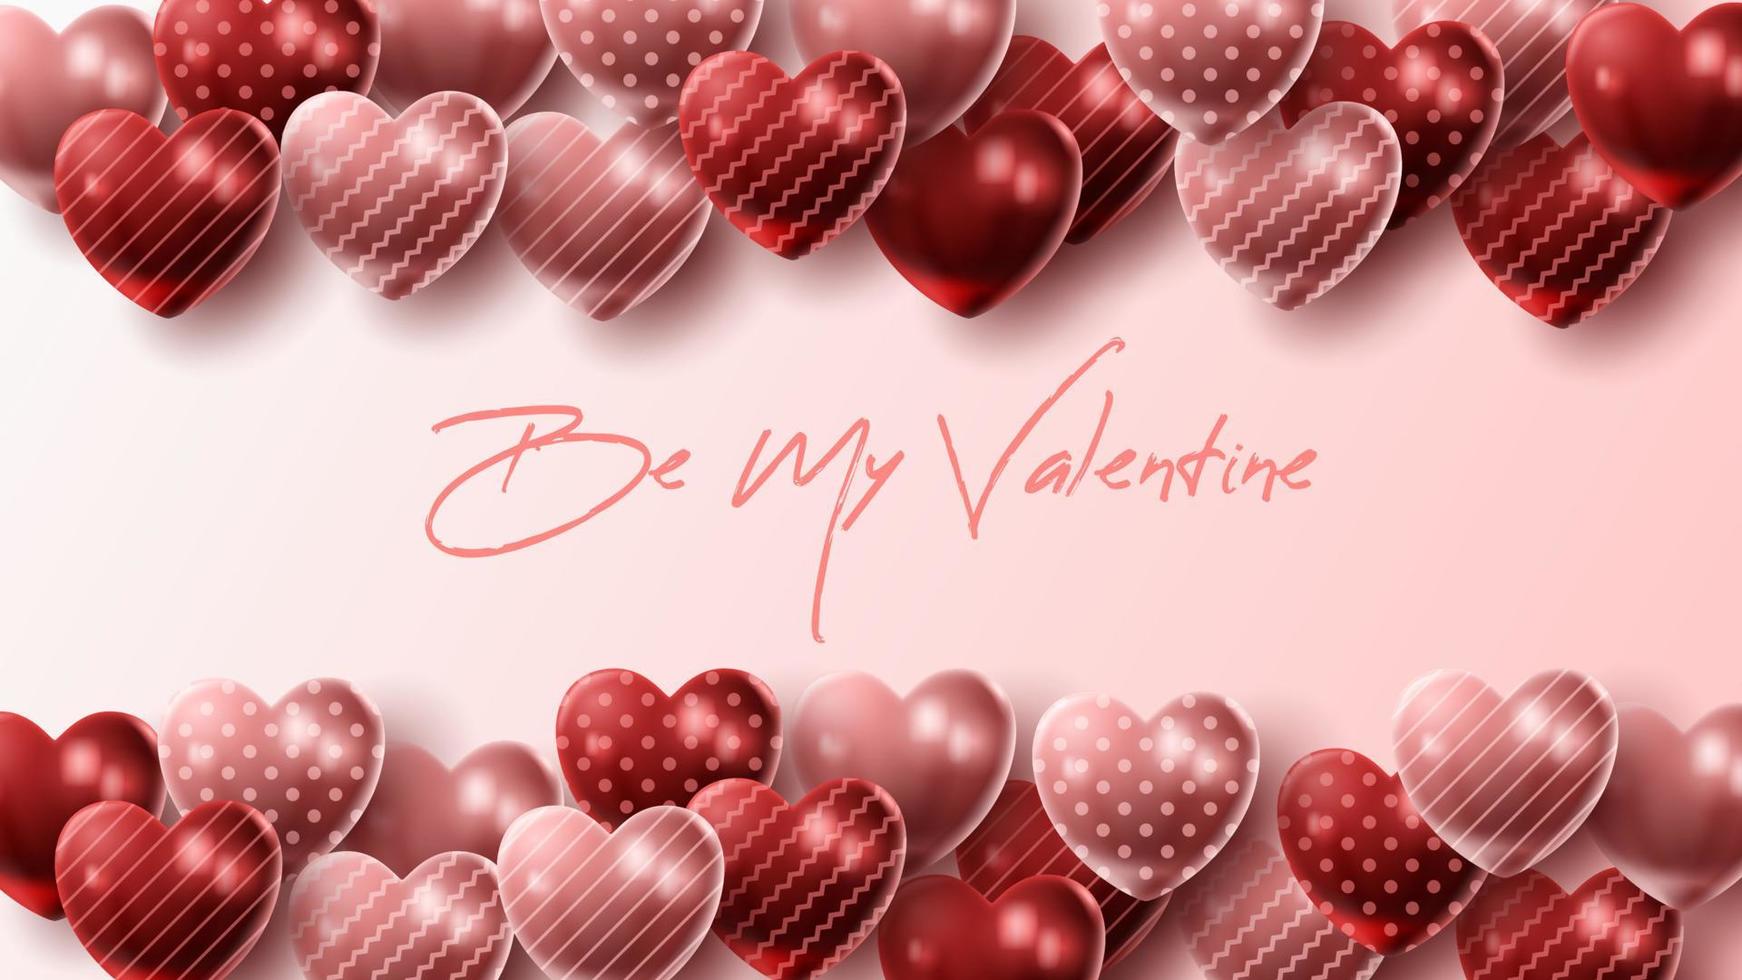 Happy Valentine's day background with heart balloon and present composition for banner, poster or greeting card. vector illustration